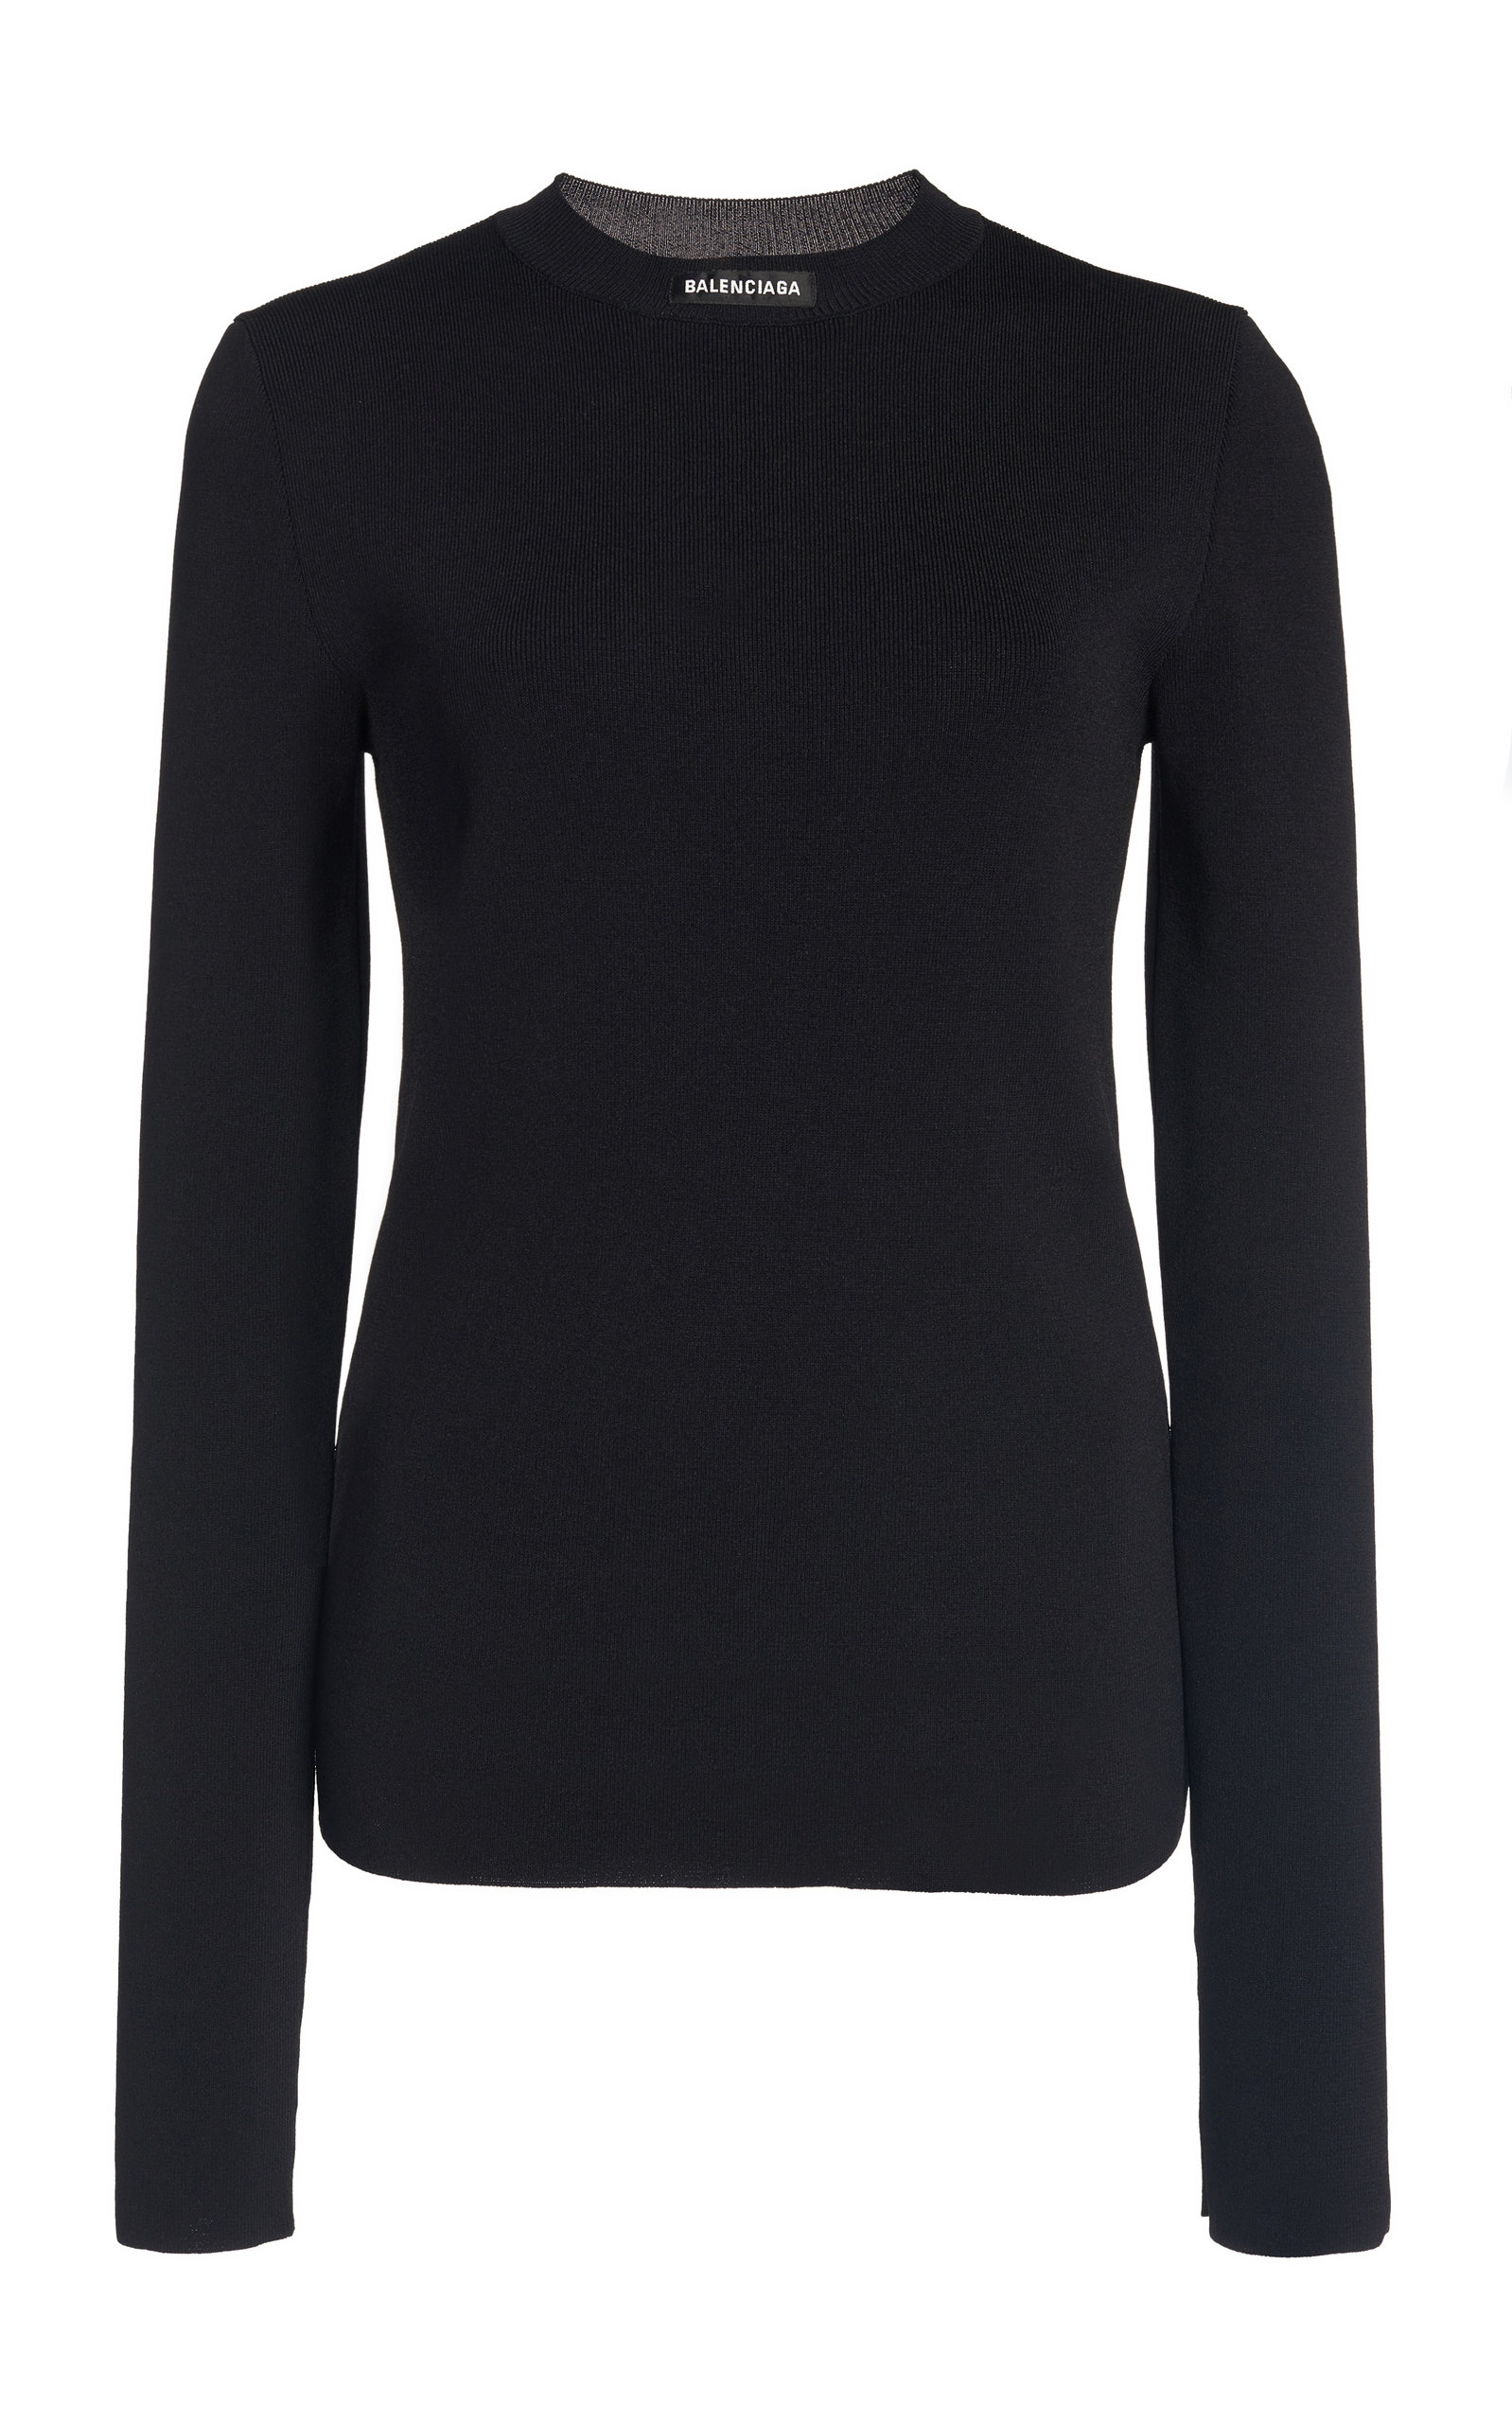 Balenciaga Women's Fitted Knit Top